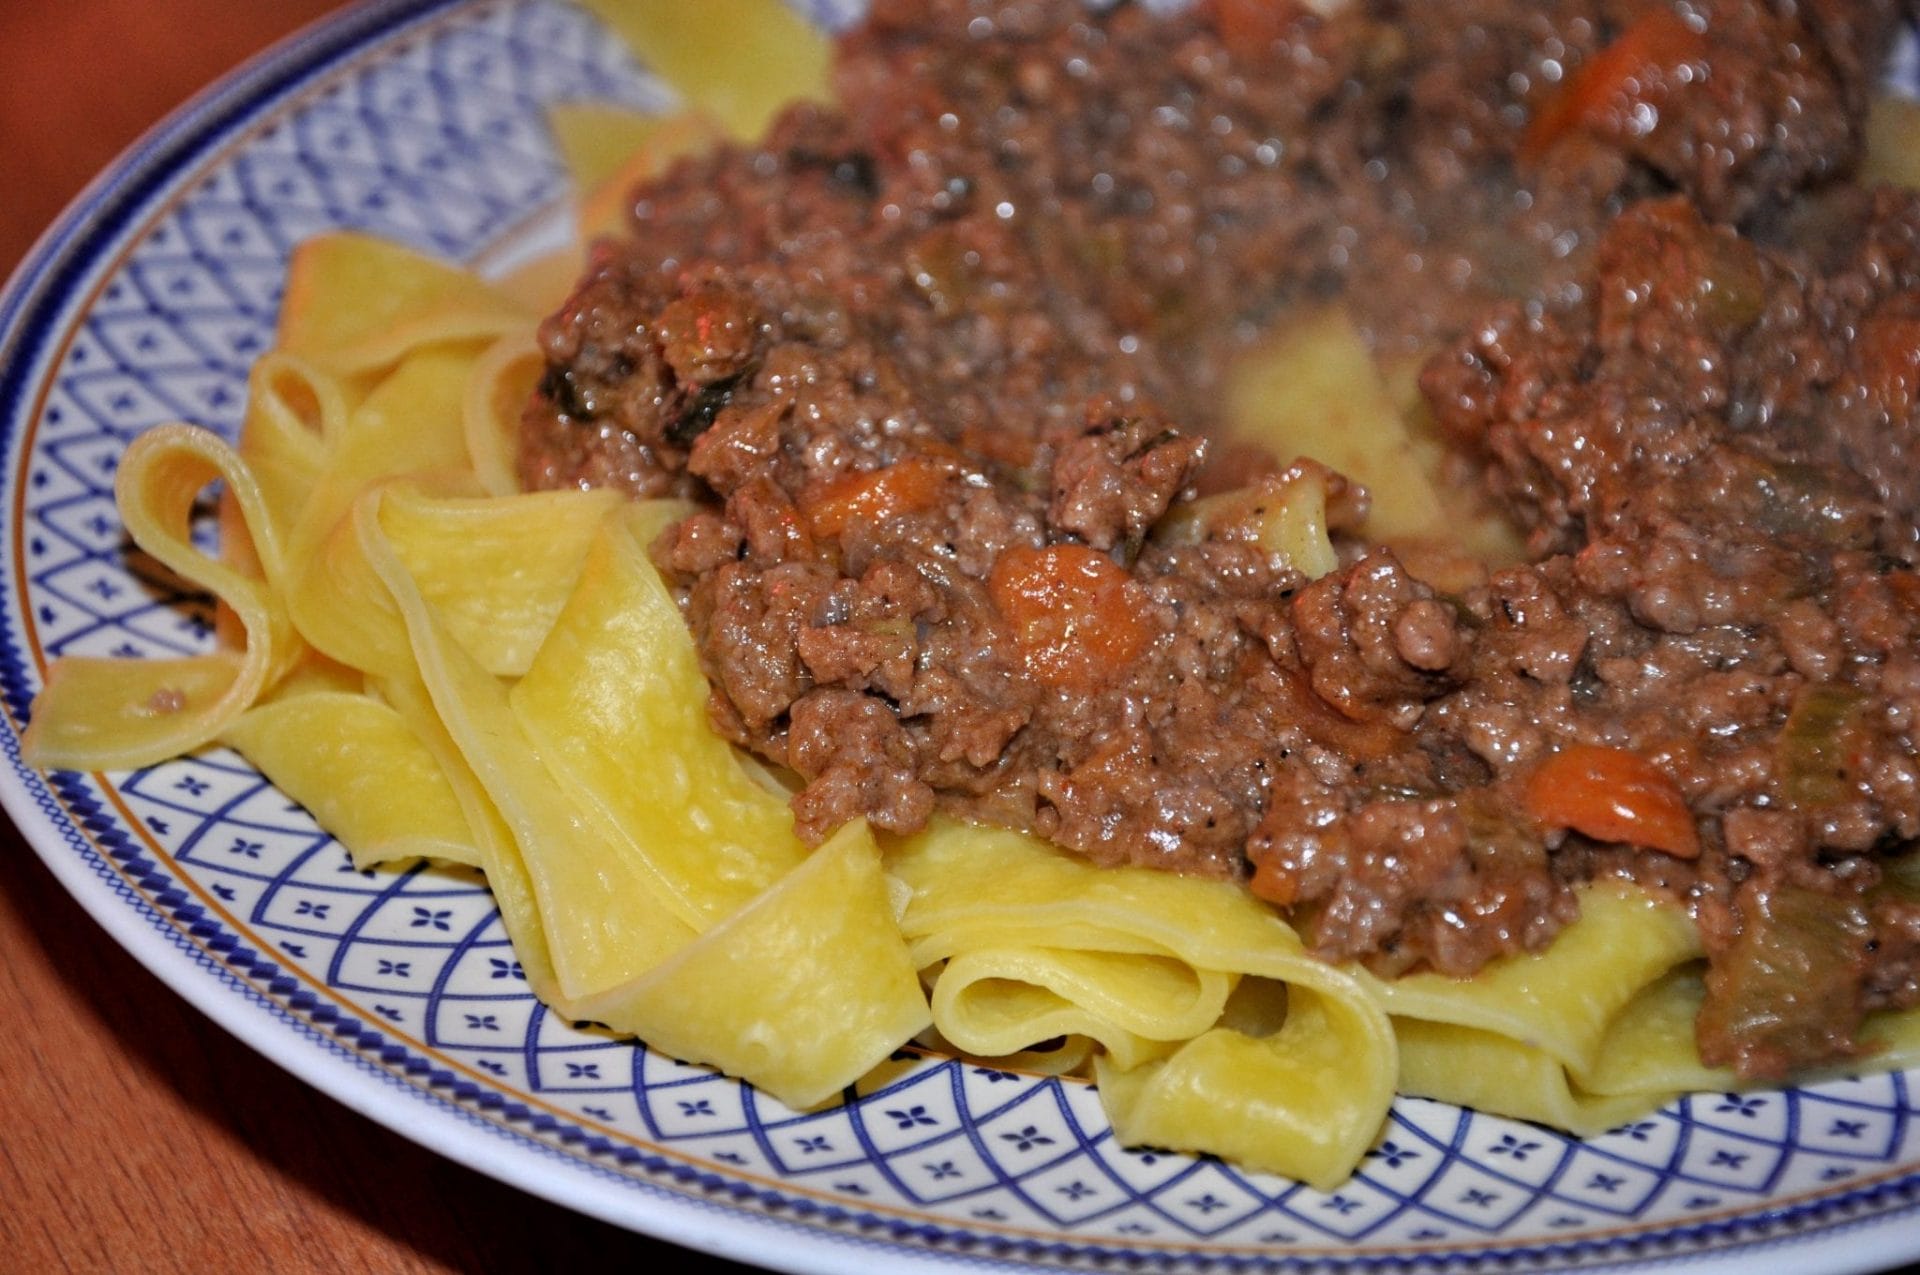 Umbrian and Tuscan ragu, a culinary specialty